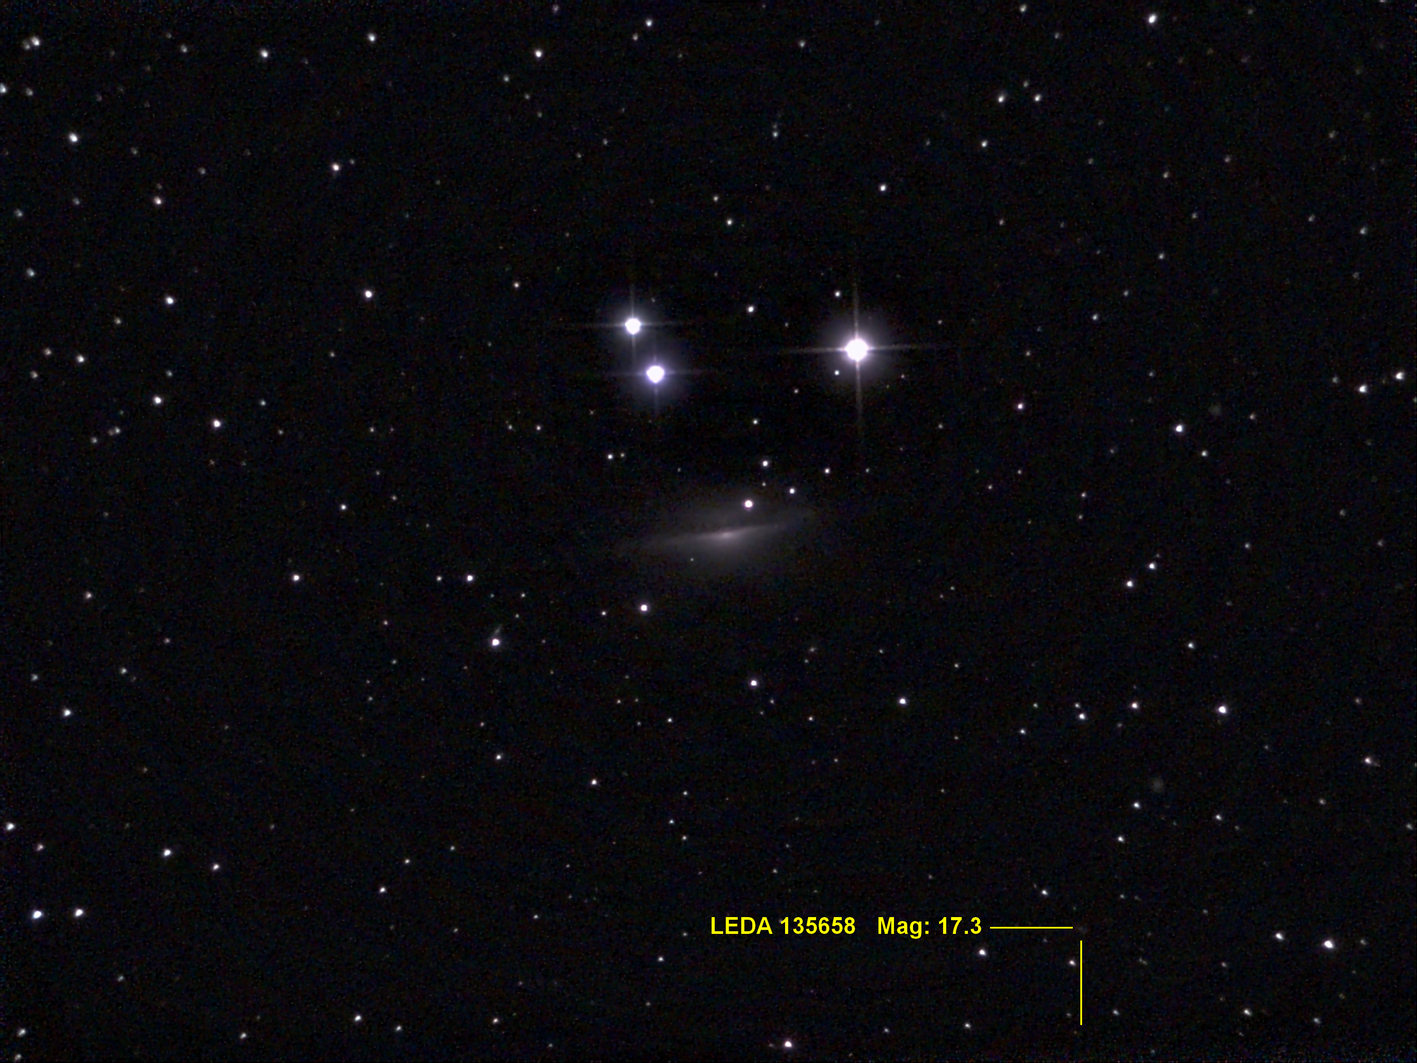 65a3e93ec6331_eVscope-20240113-191655NGC105520min-Copie.png.6e6c08b55c6a247f9df95f13f1ae0cbc.png